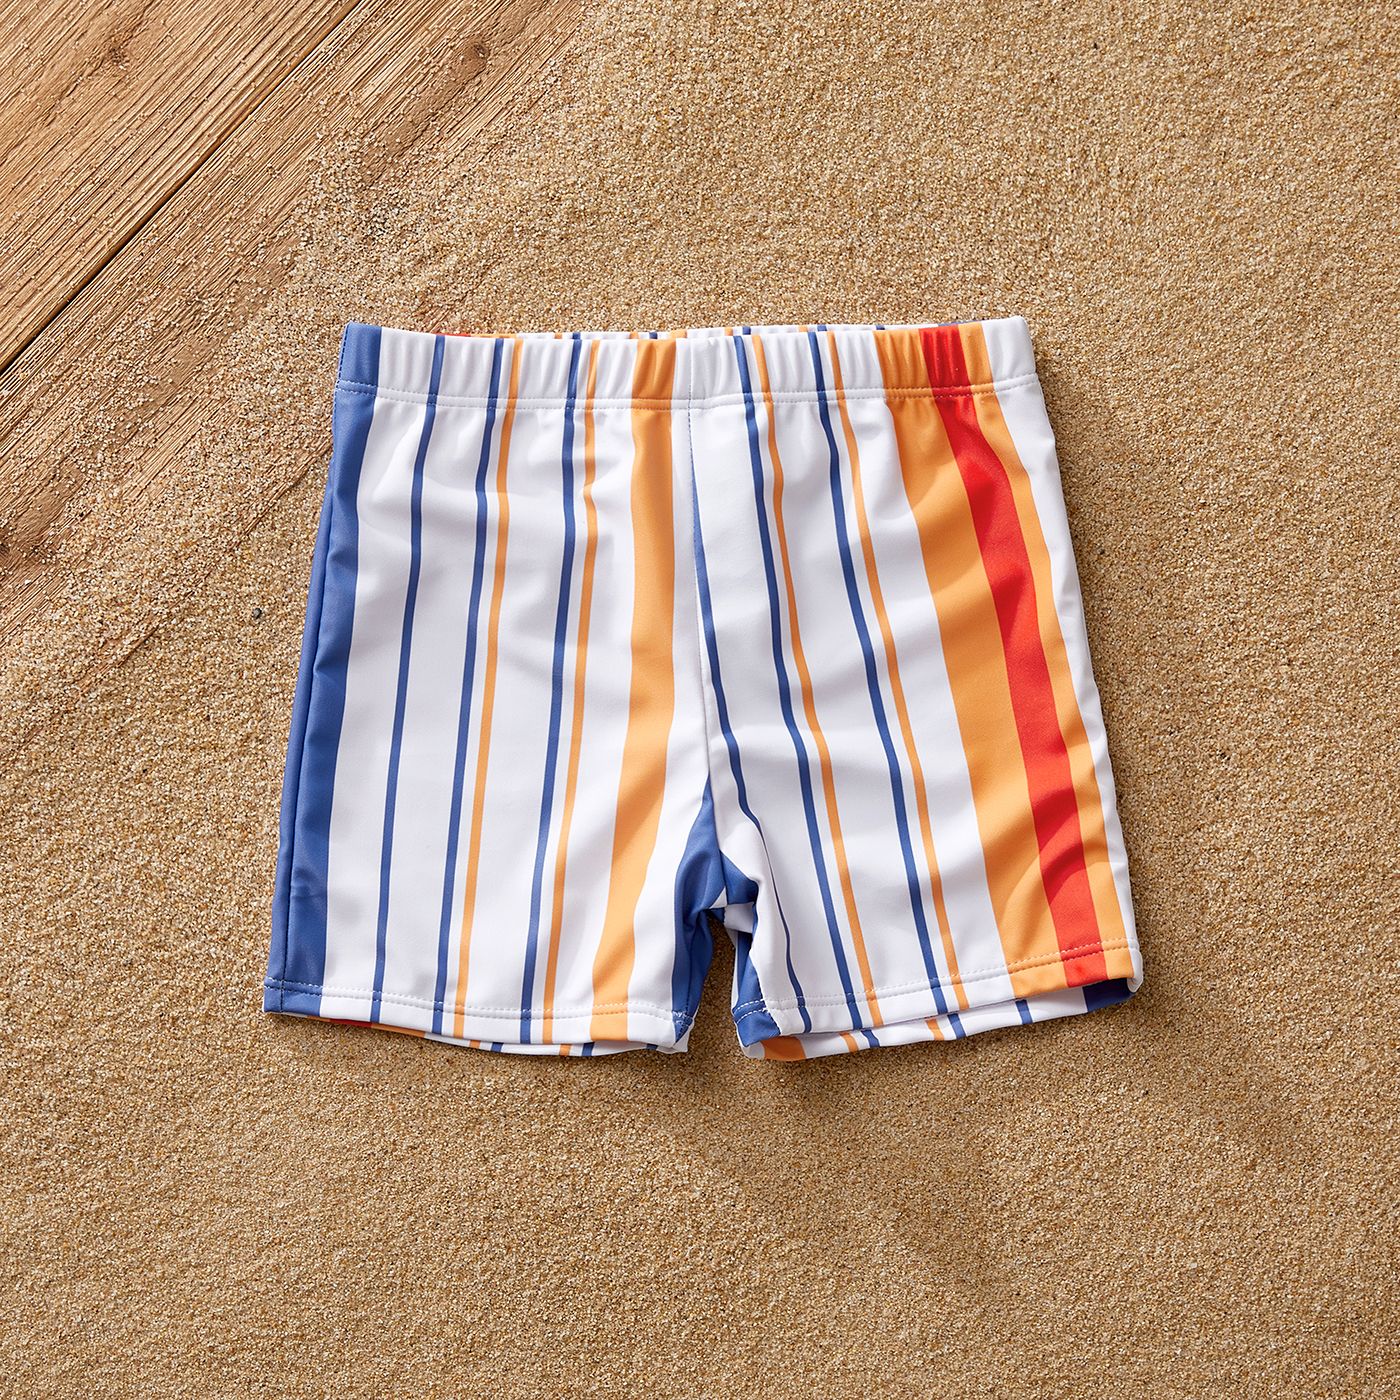 Family Matching Colorful Stripe Two-piece Swimsuit Or Swim Trunks Shorts